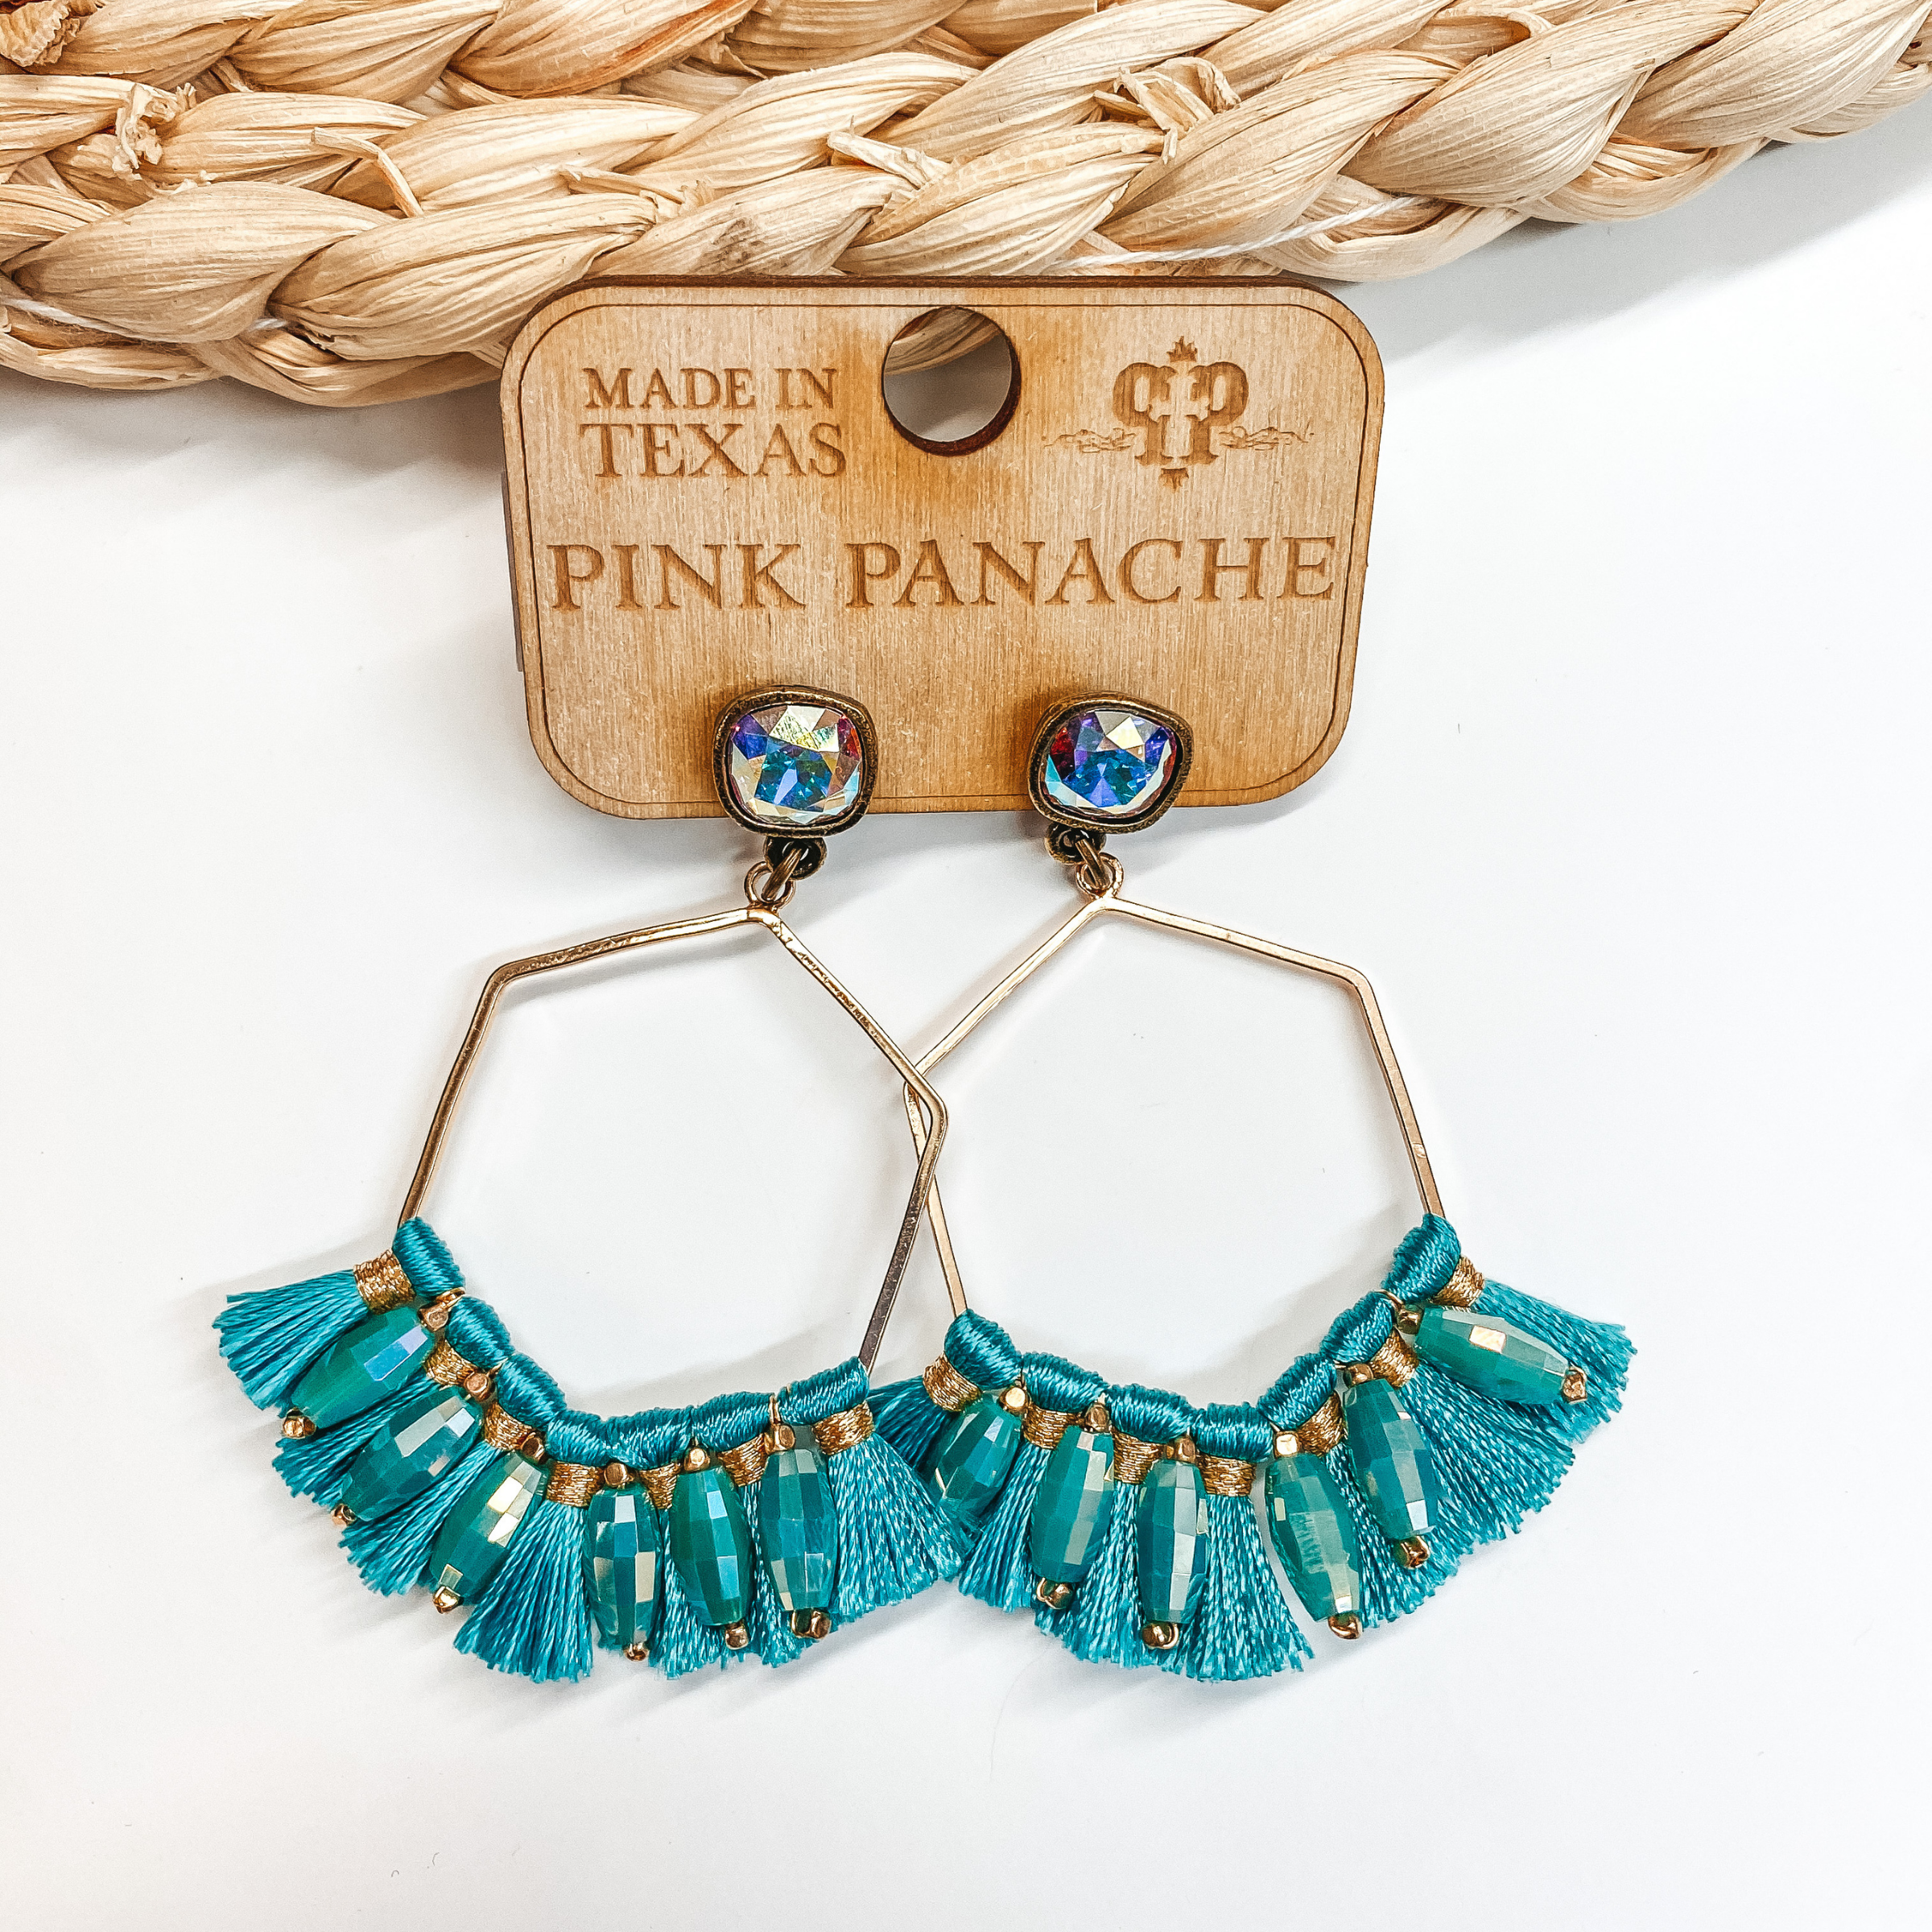 Pink Panache | Hexagon Wire Earrings with Fringe Detailing and Clear Cushion Cut Crystal in Gold and Turquoise - Giddy Up Glamour Boutique